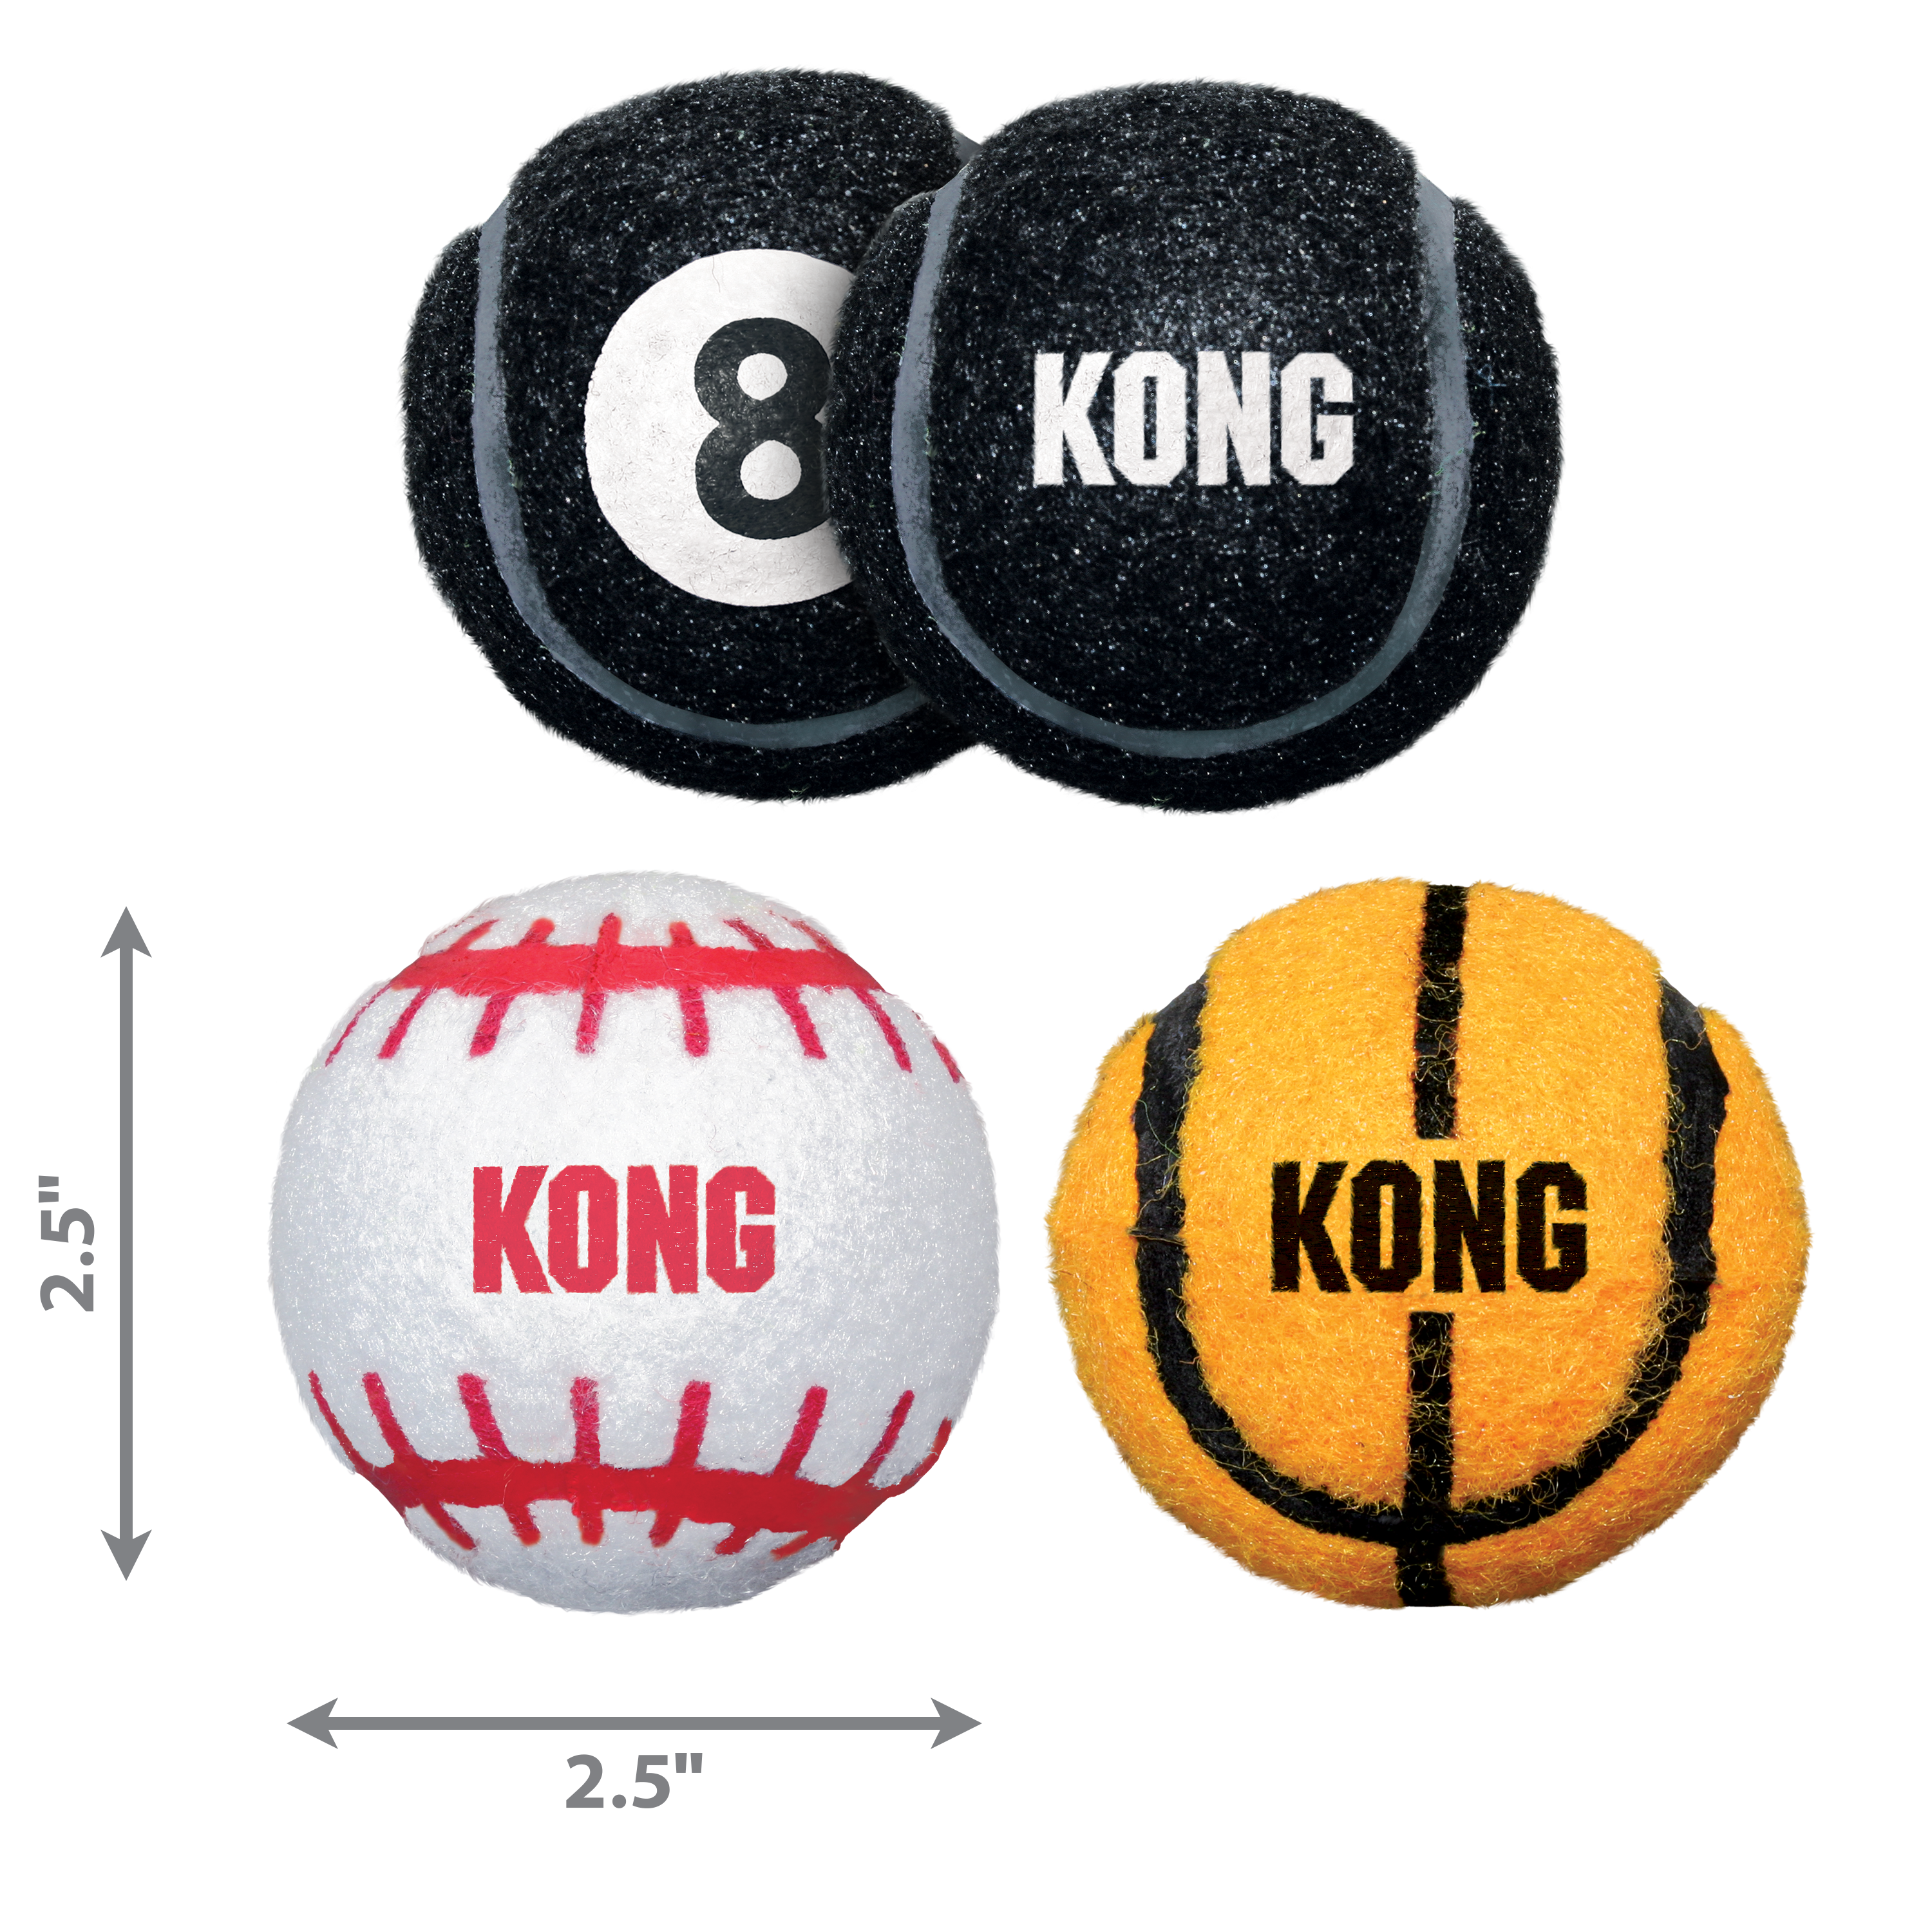 Sport® Ball Basketball dimoffpack product image